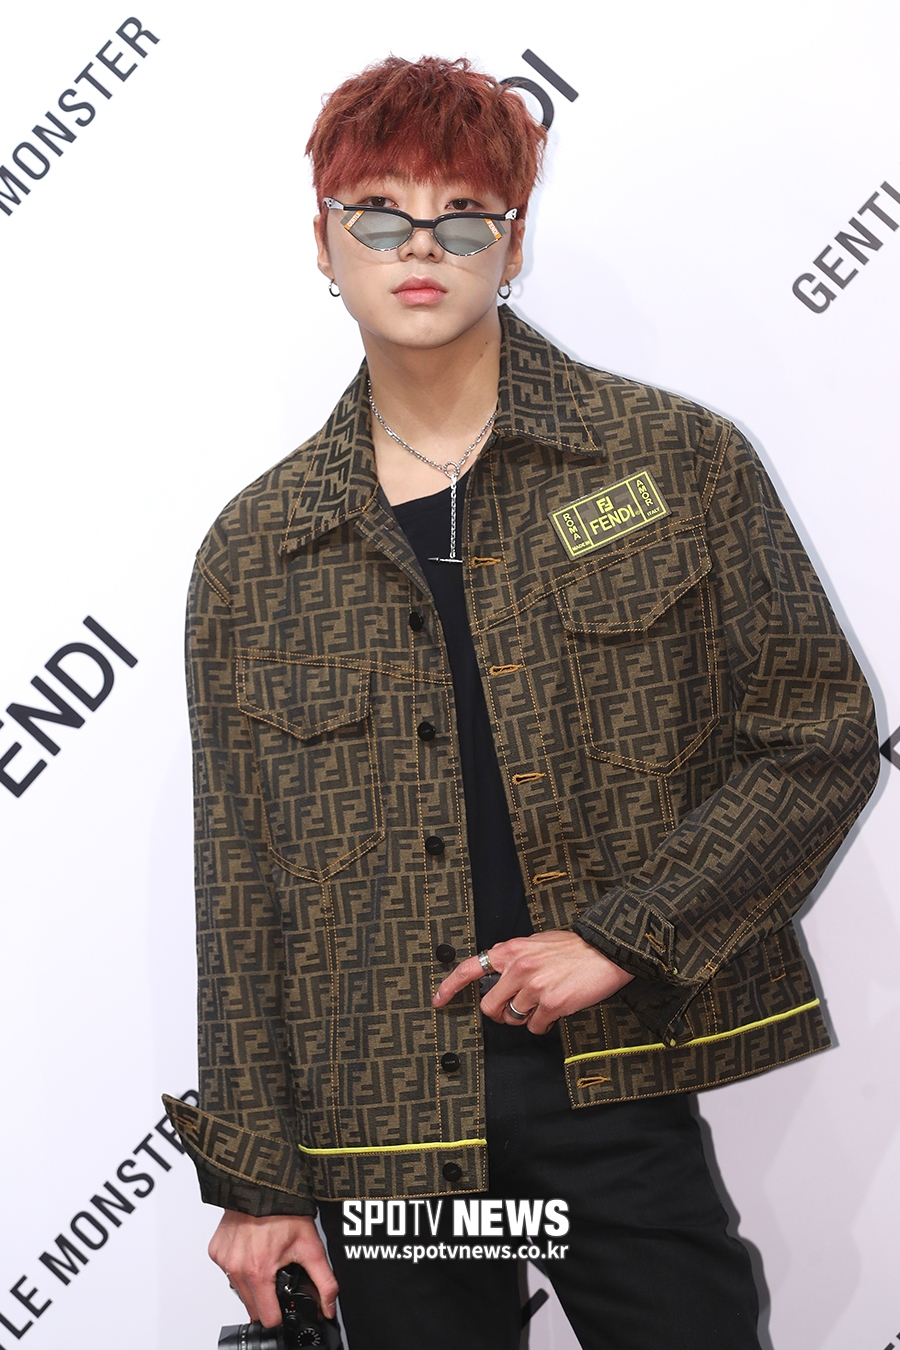 WINNER Kang Seung-yoon poses at the launching photo wall event held at a store in Sinsa-dong, Gangnam-gu, Seoul on the afternoon of the 7th.